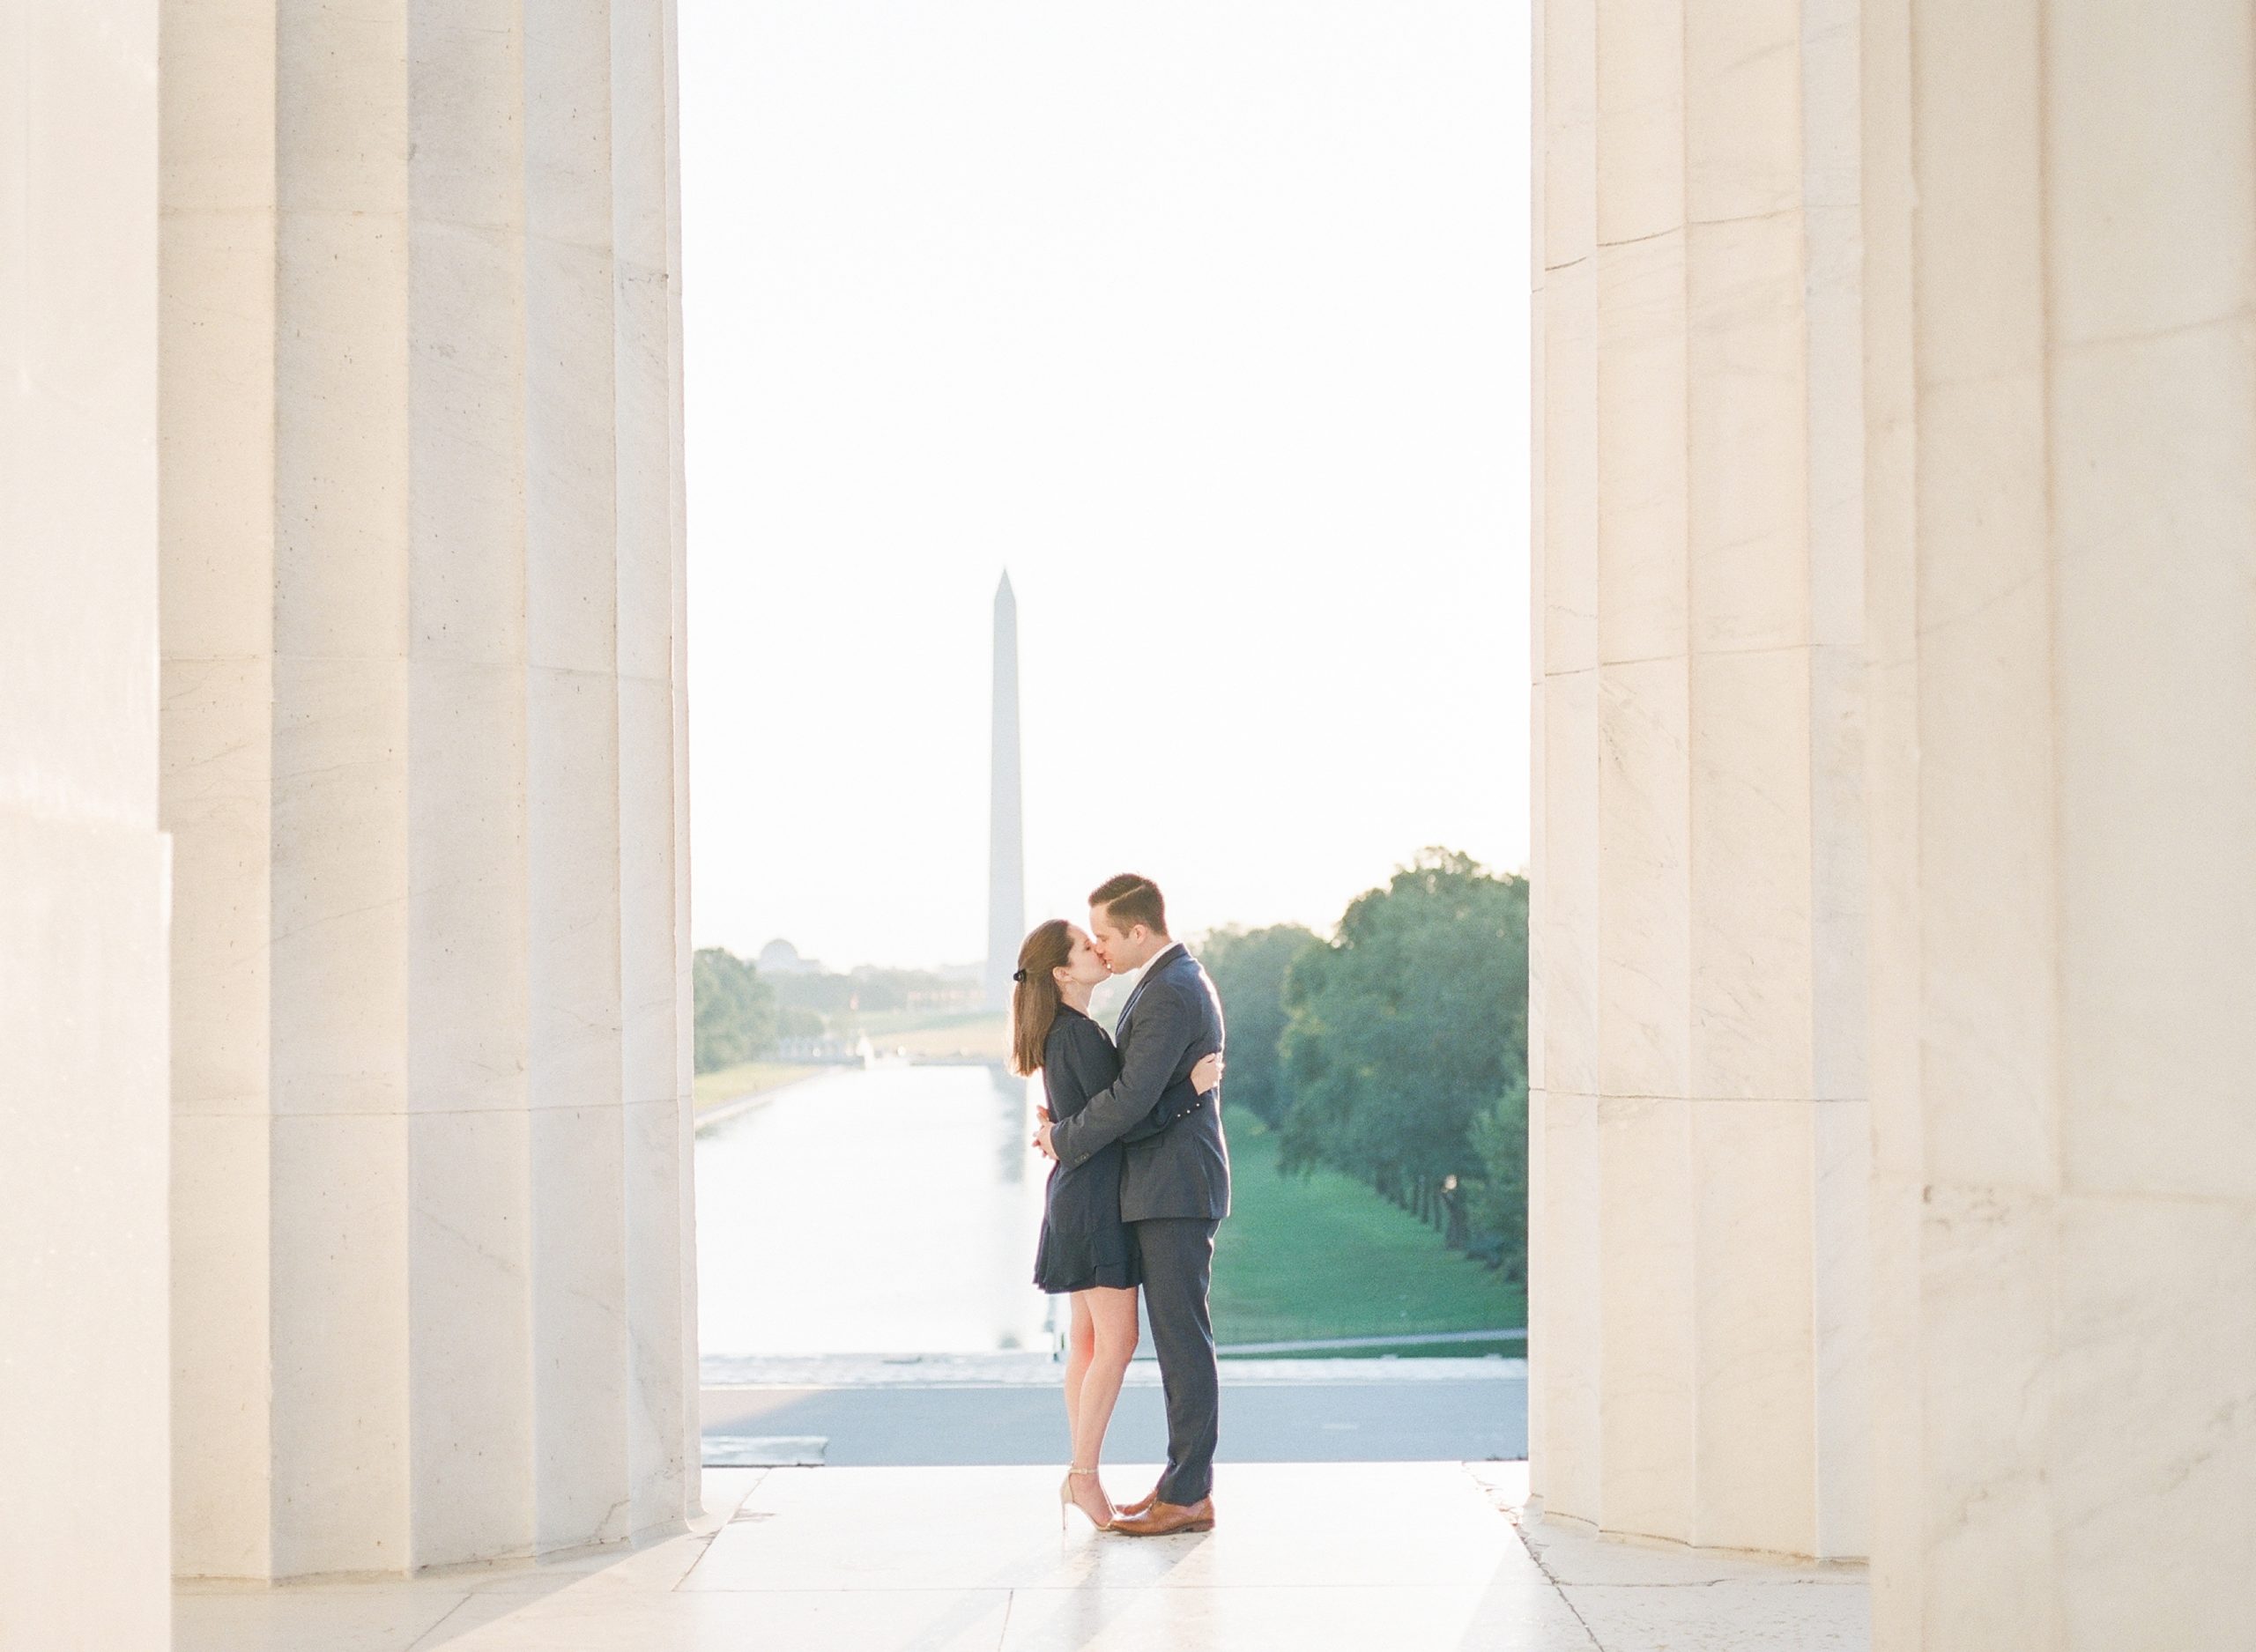 An elegant fall engagement session captured at sunrise on film at the Lincoln Memorial in downtown Washington, DC.